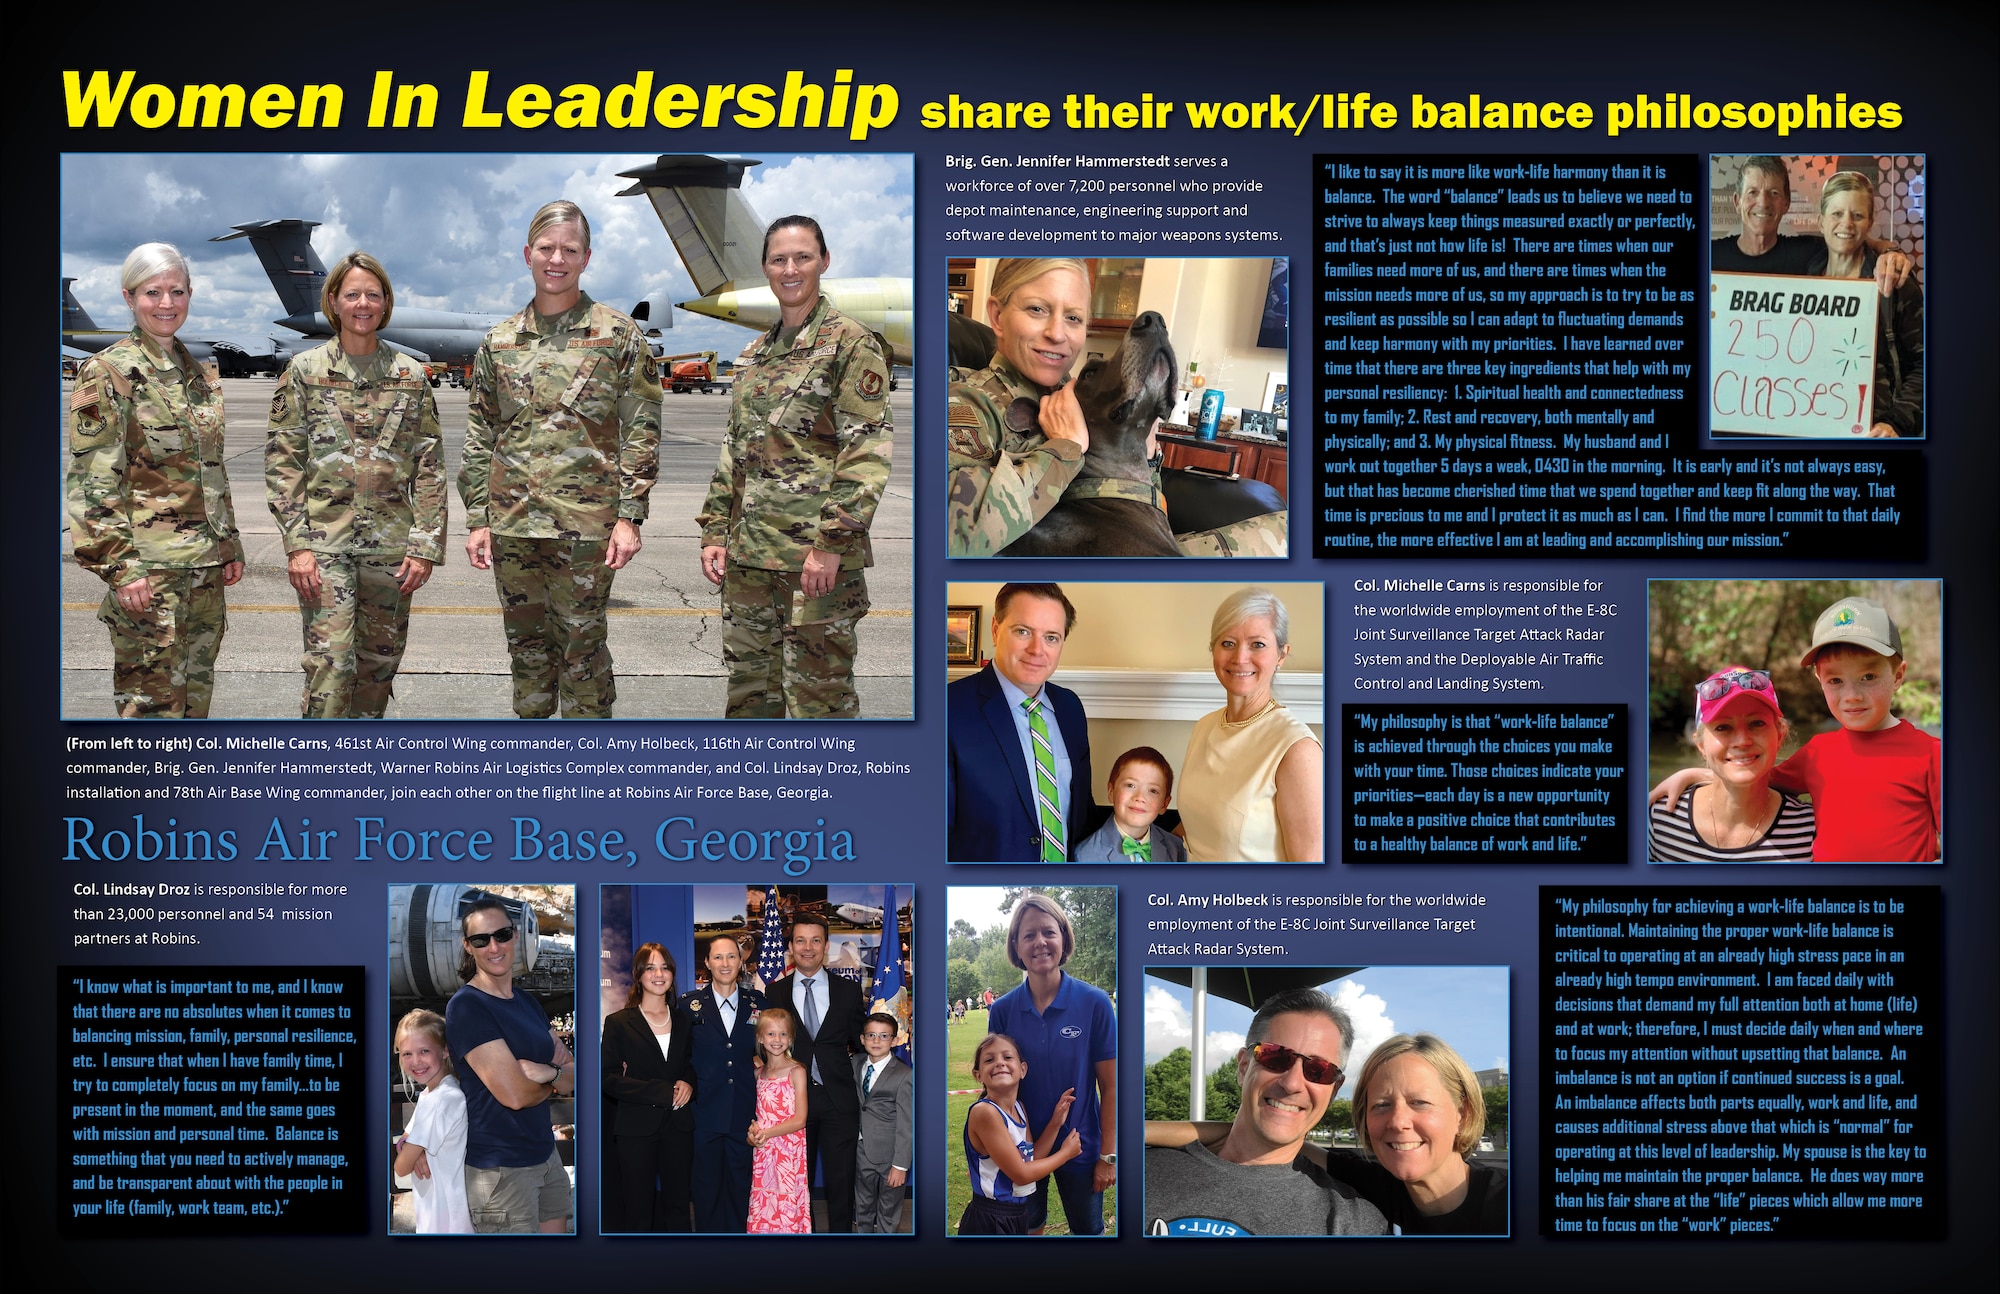 Graphic has multiple personal pictures and a group picture along with quotes about work-life philosophy from each commander.